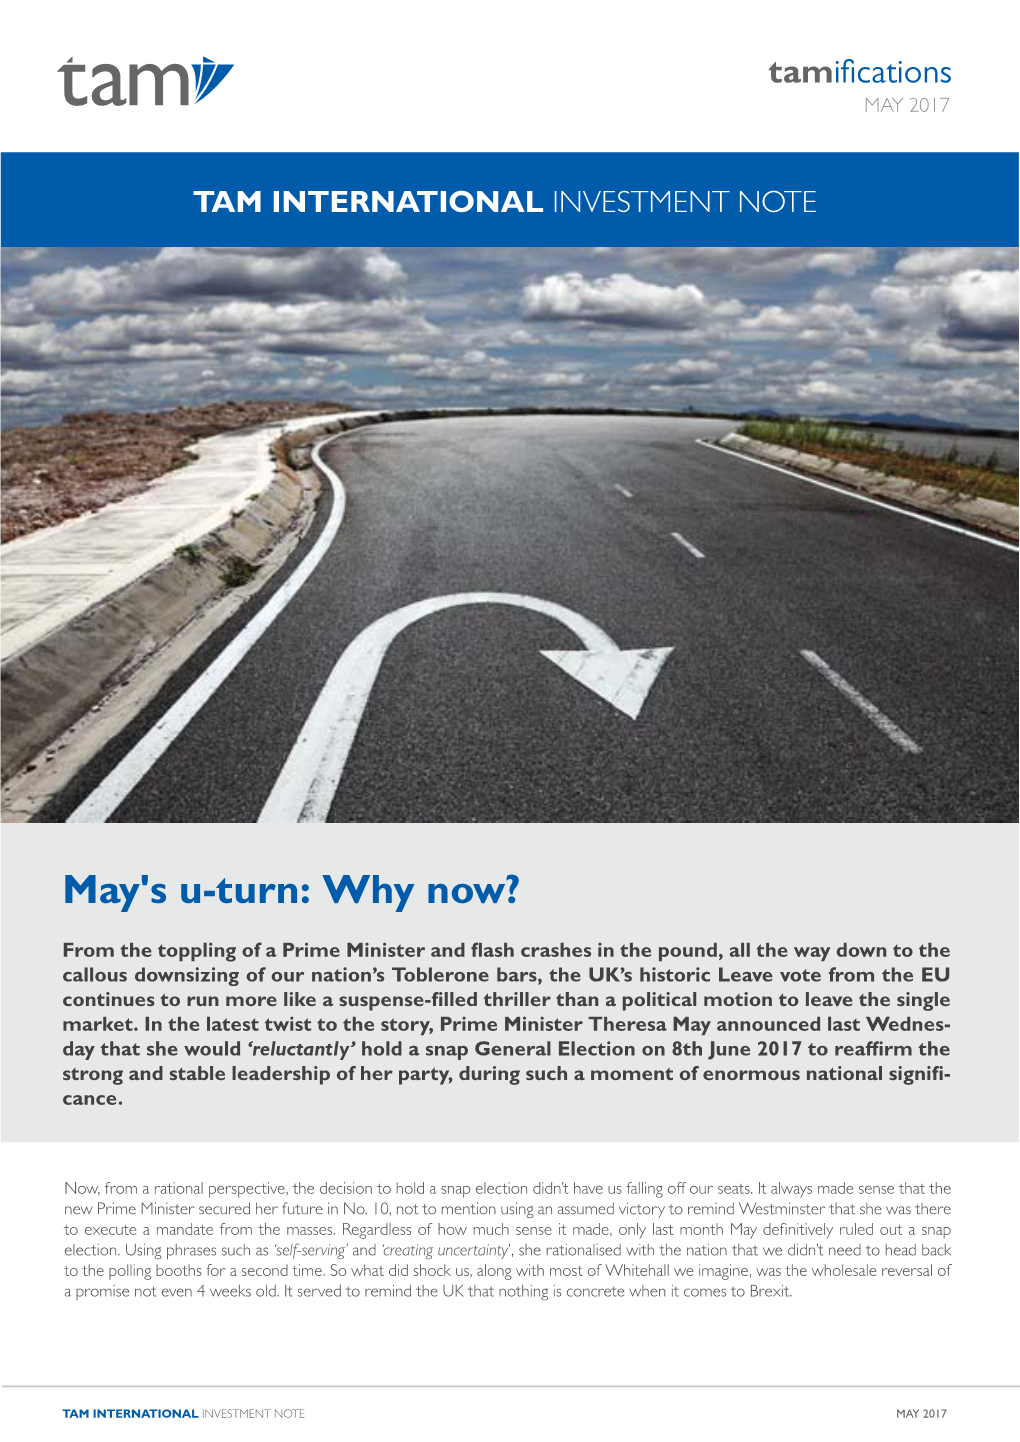 May's U-Turn: Why Now?